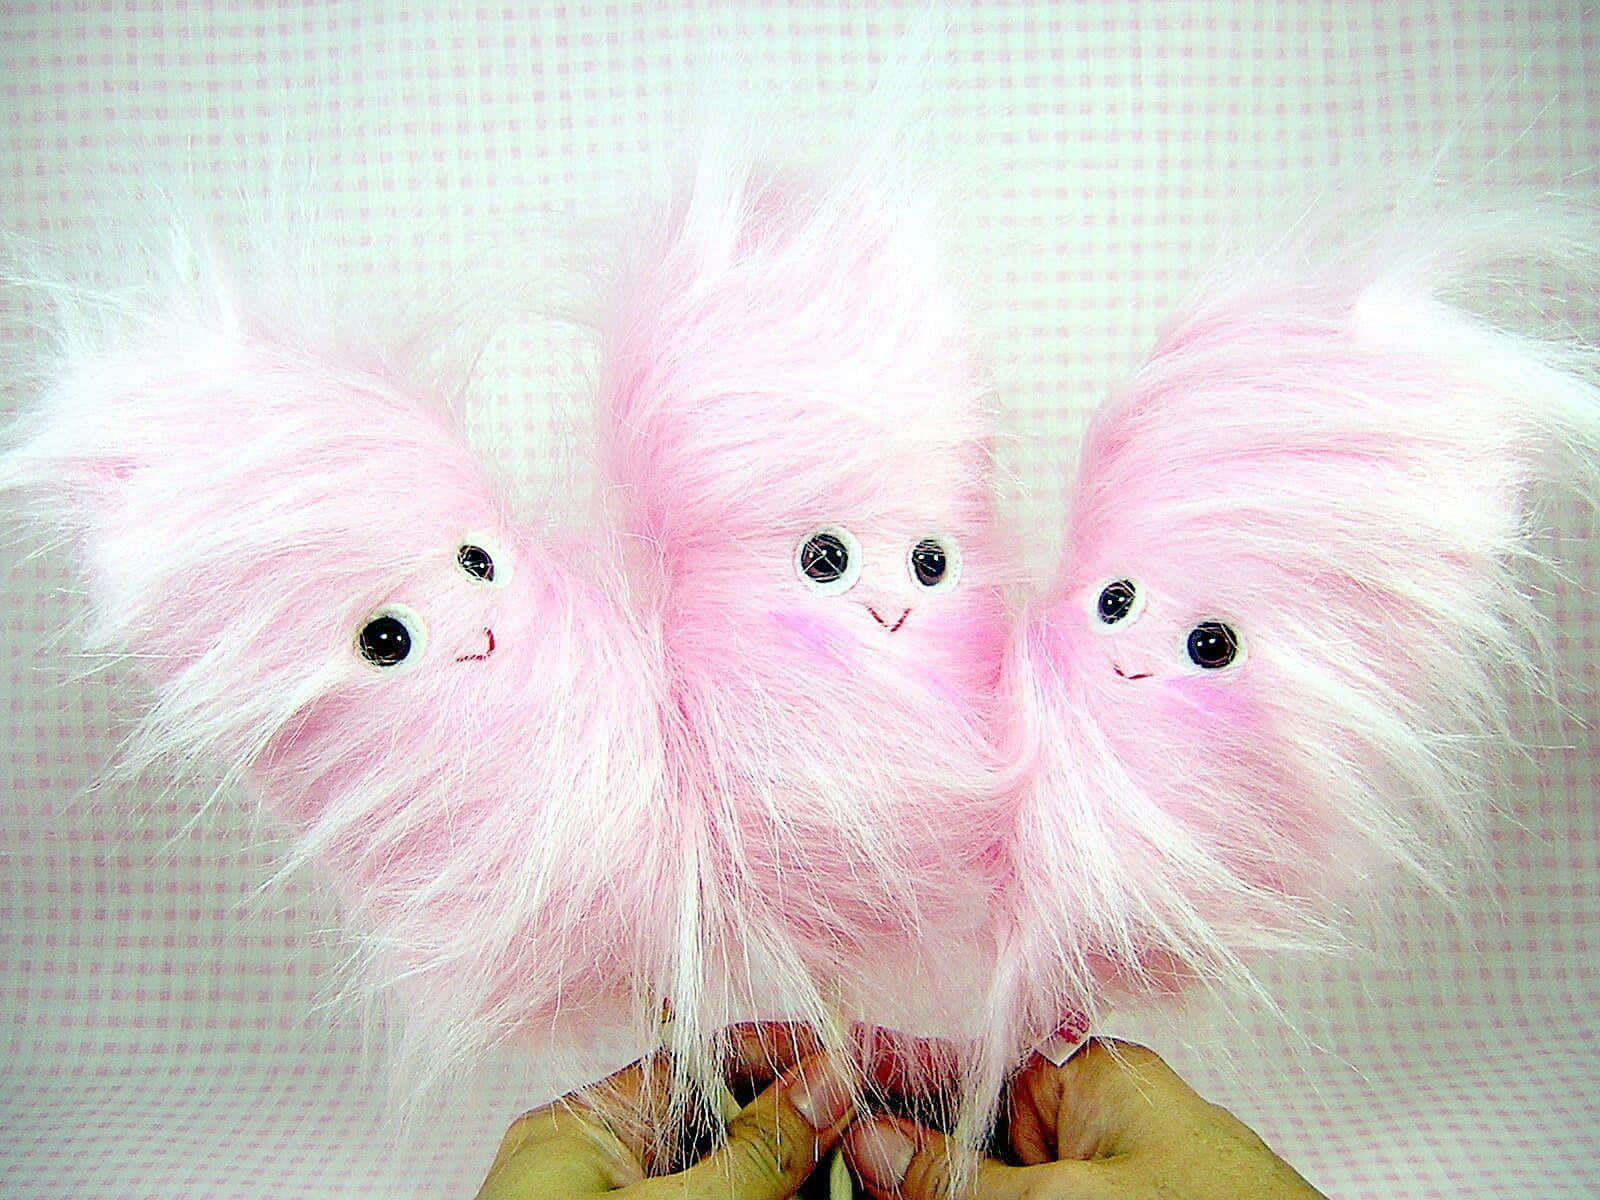 Adorable Three Pink Cotton Candy Plush Toys Background